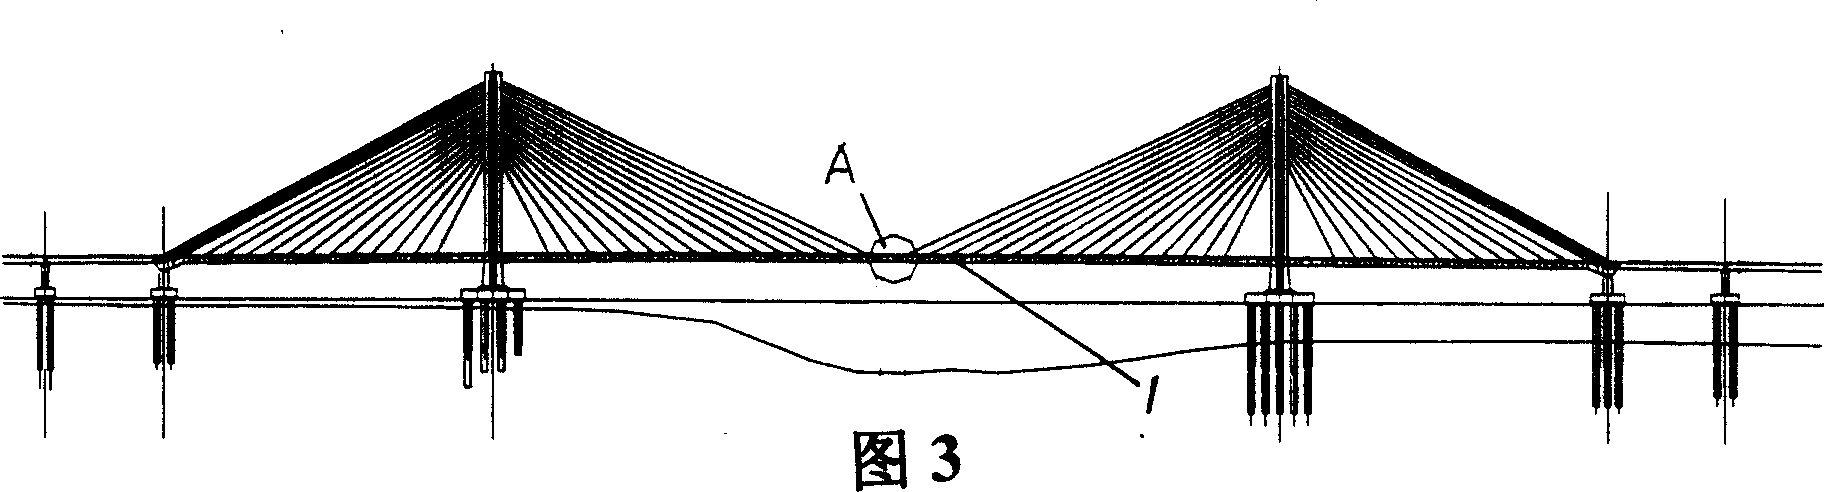 Wind fairing structure for controlling buffet of cable-stayed bridge